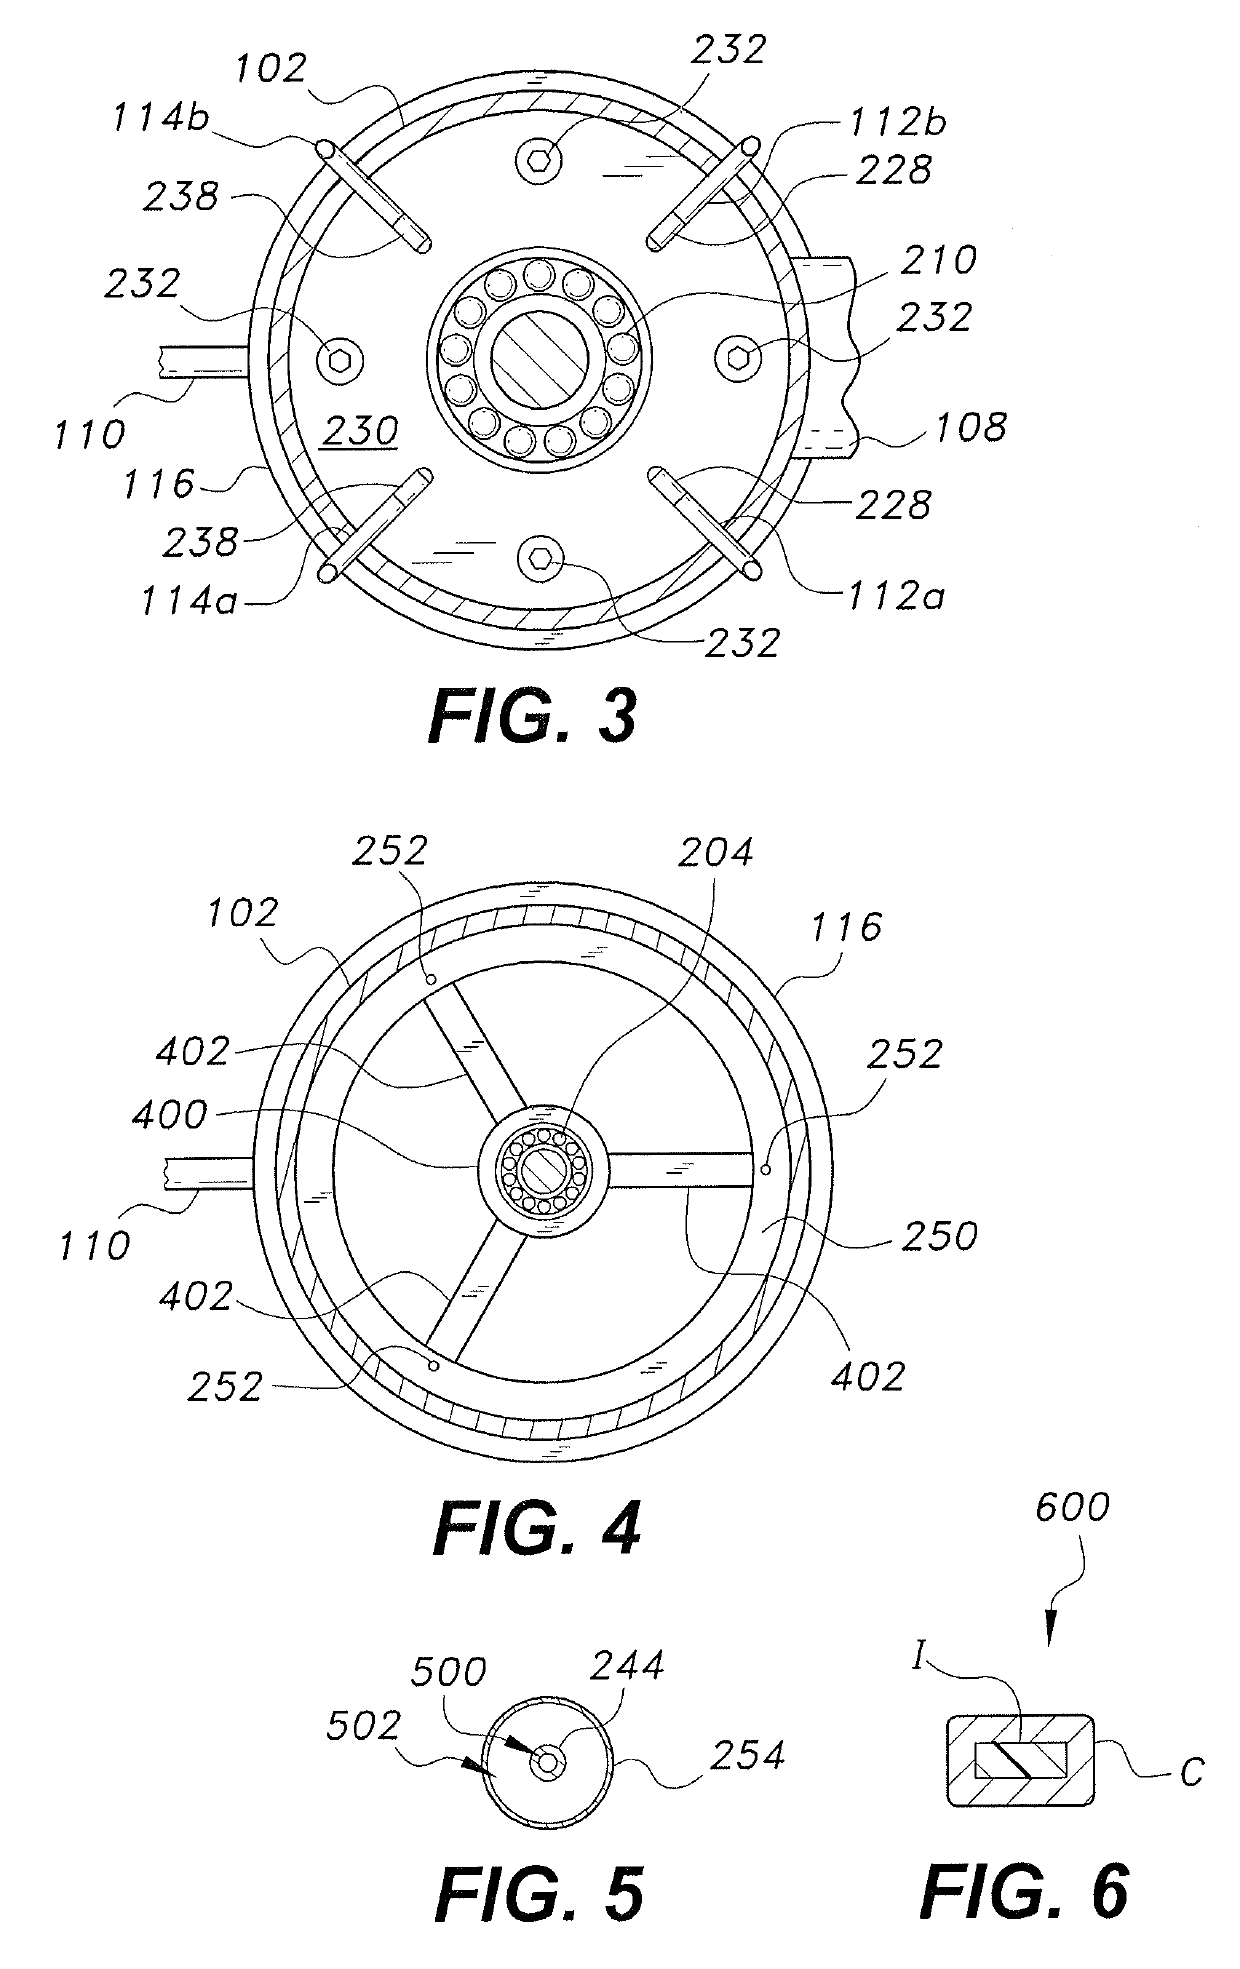 Compound nozzle for cement 3D printer to produce thermally insulated composite cement